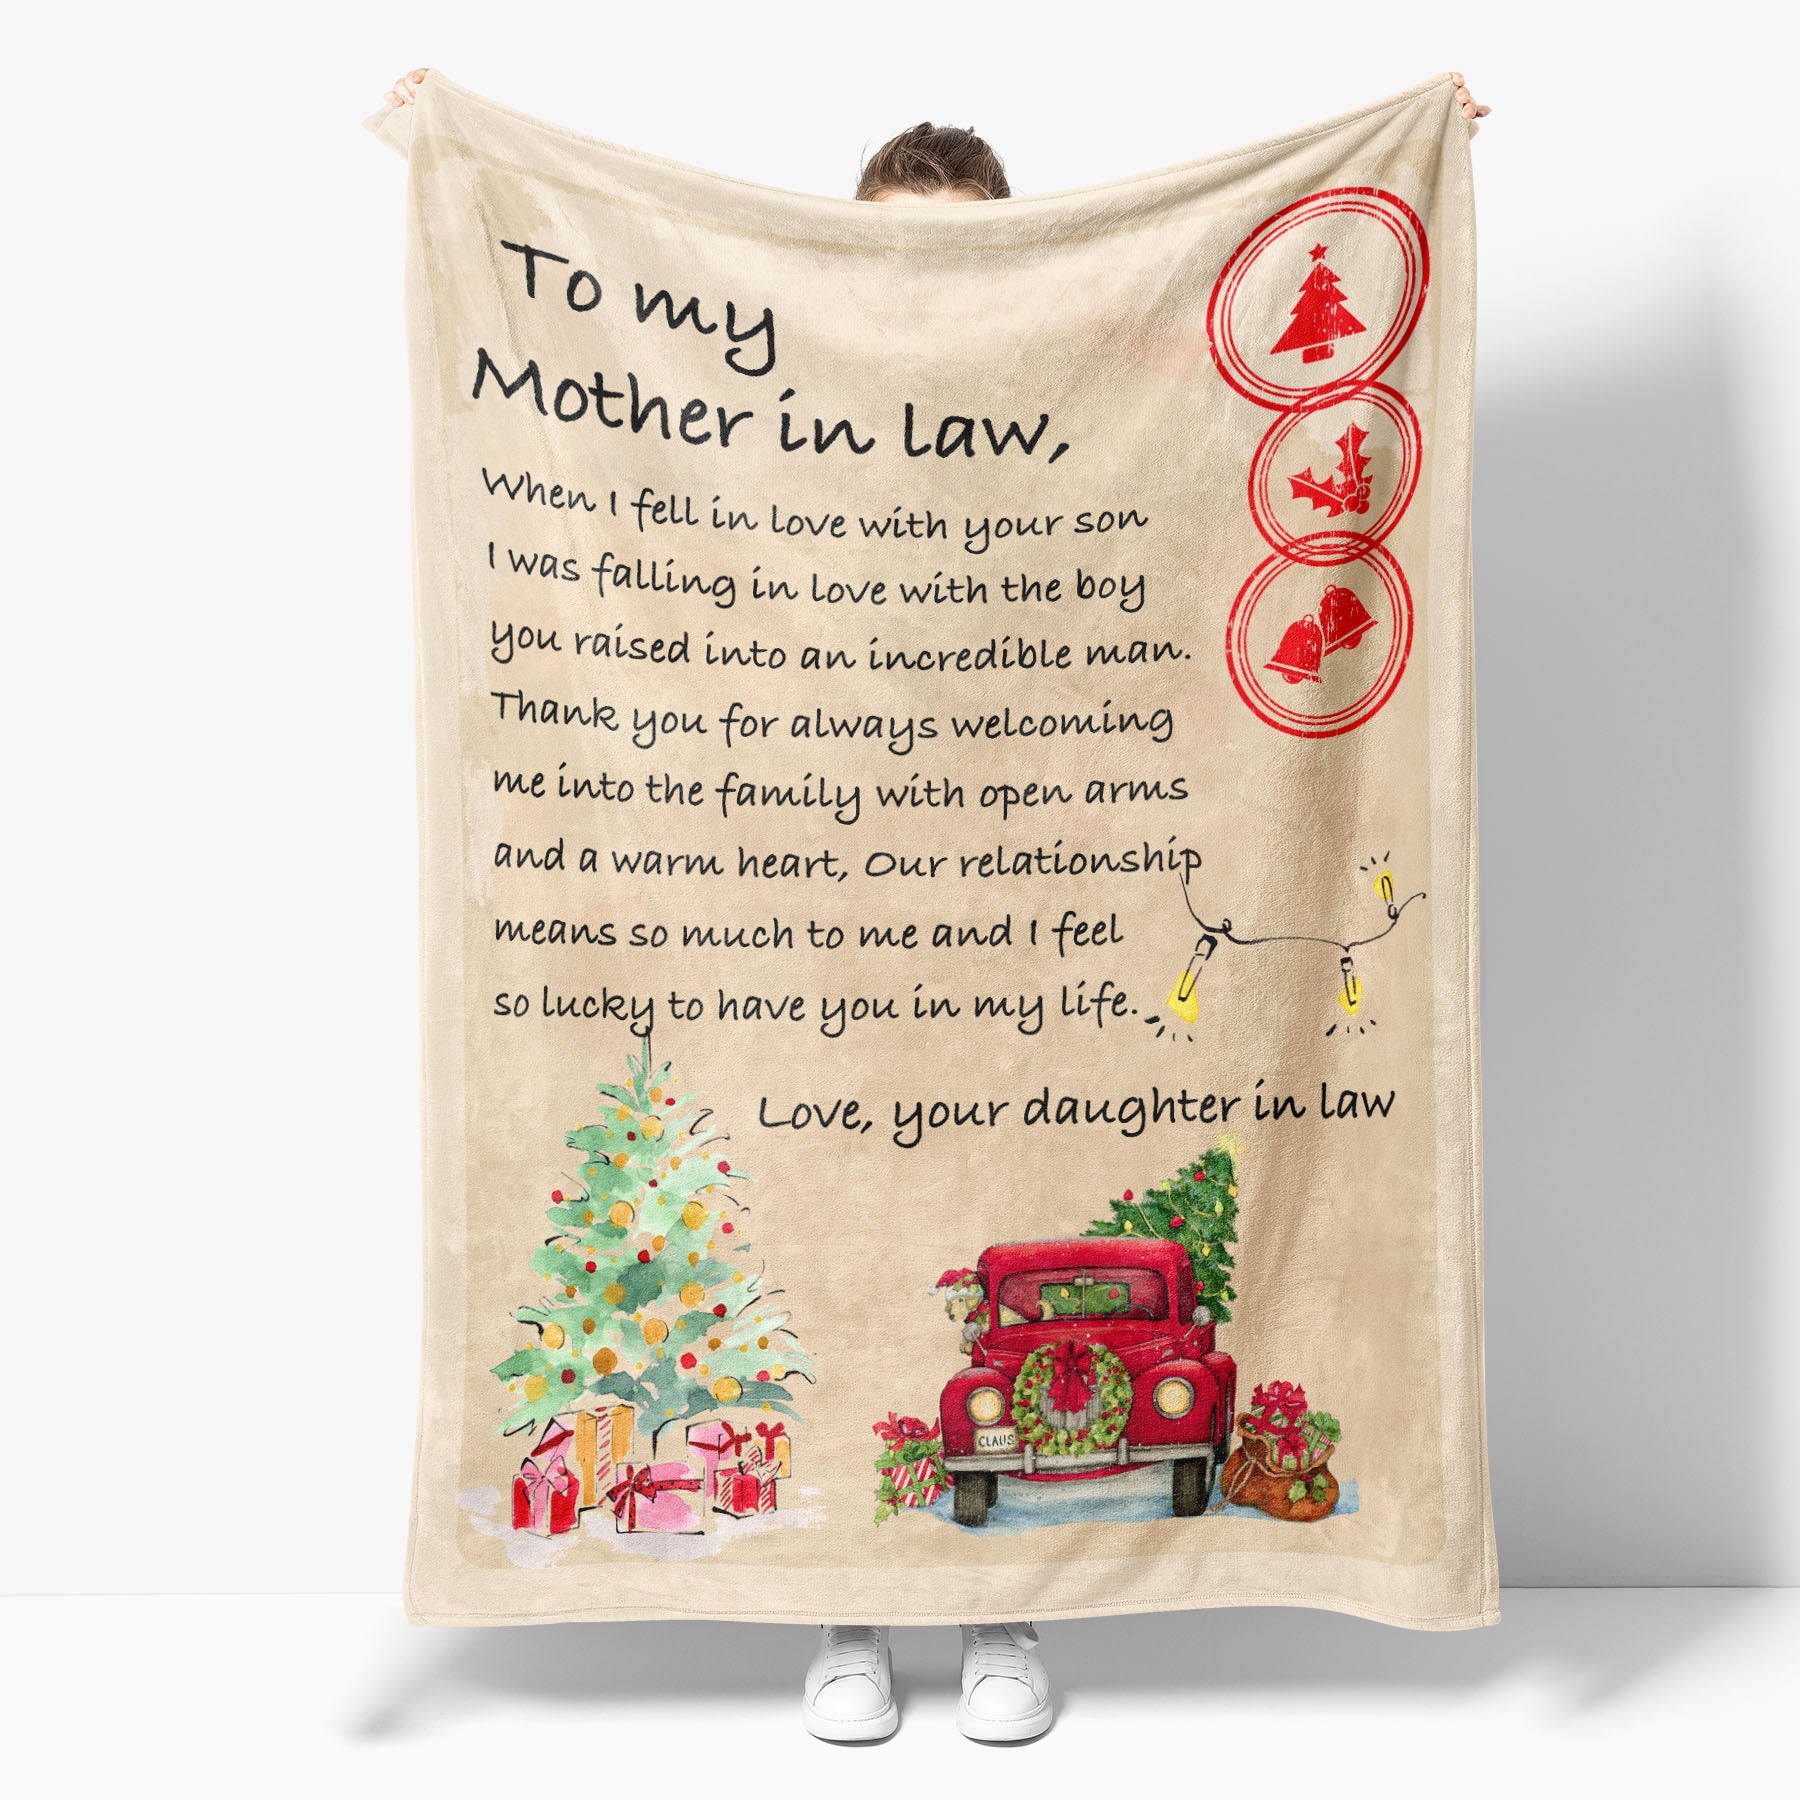 Christmas Blanket Gift Ideas for Mother in Law When I Fell in Love with your Son The Boy You Raised into Daughter in Law 201126 - Sherpa